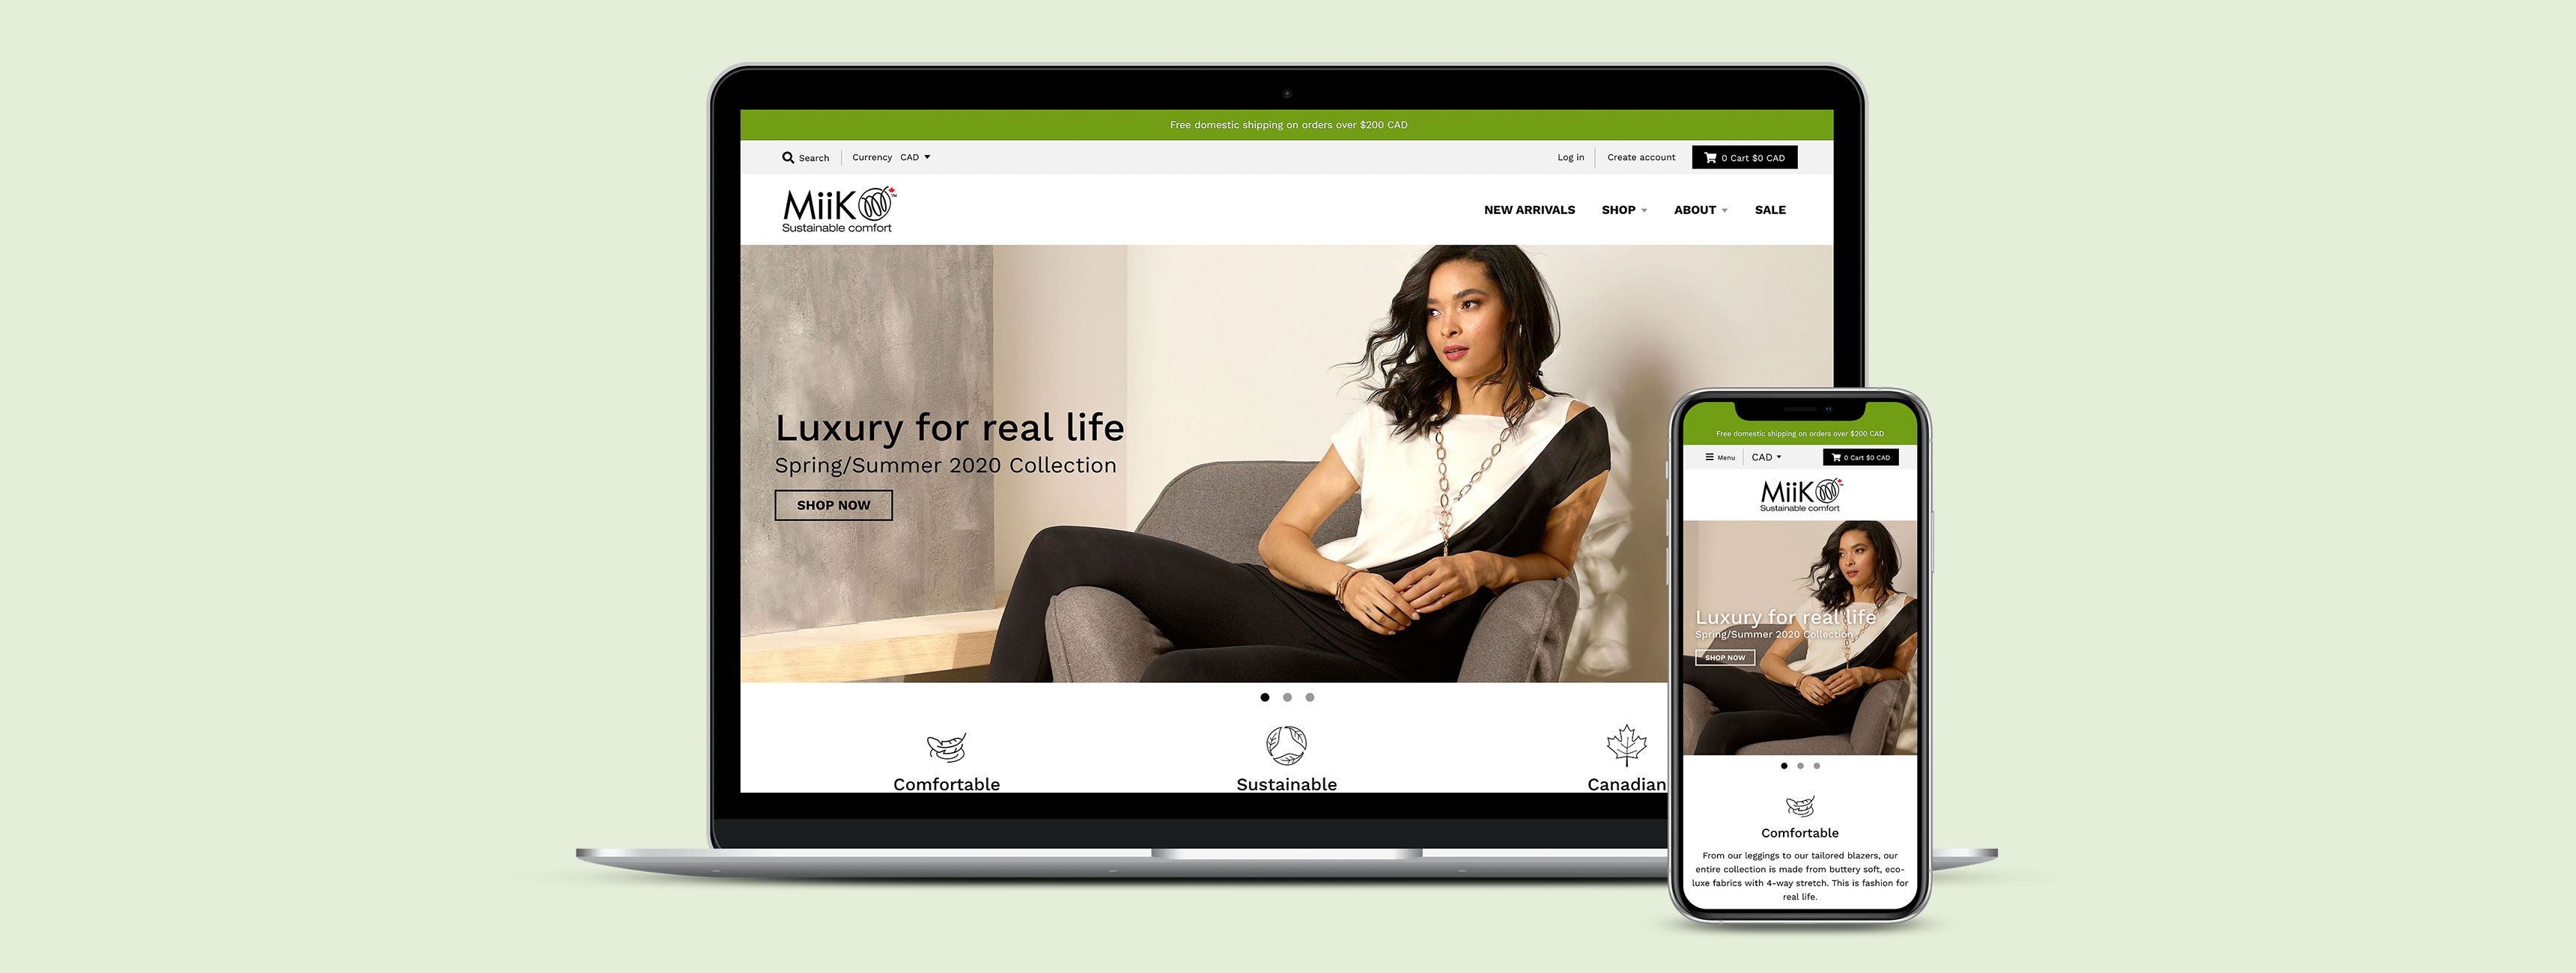 Laptop and a smartphone with the Miik homepage displayed